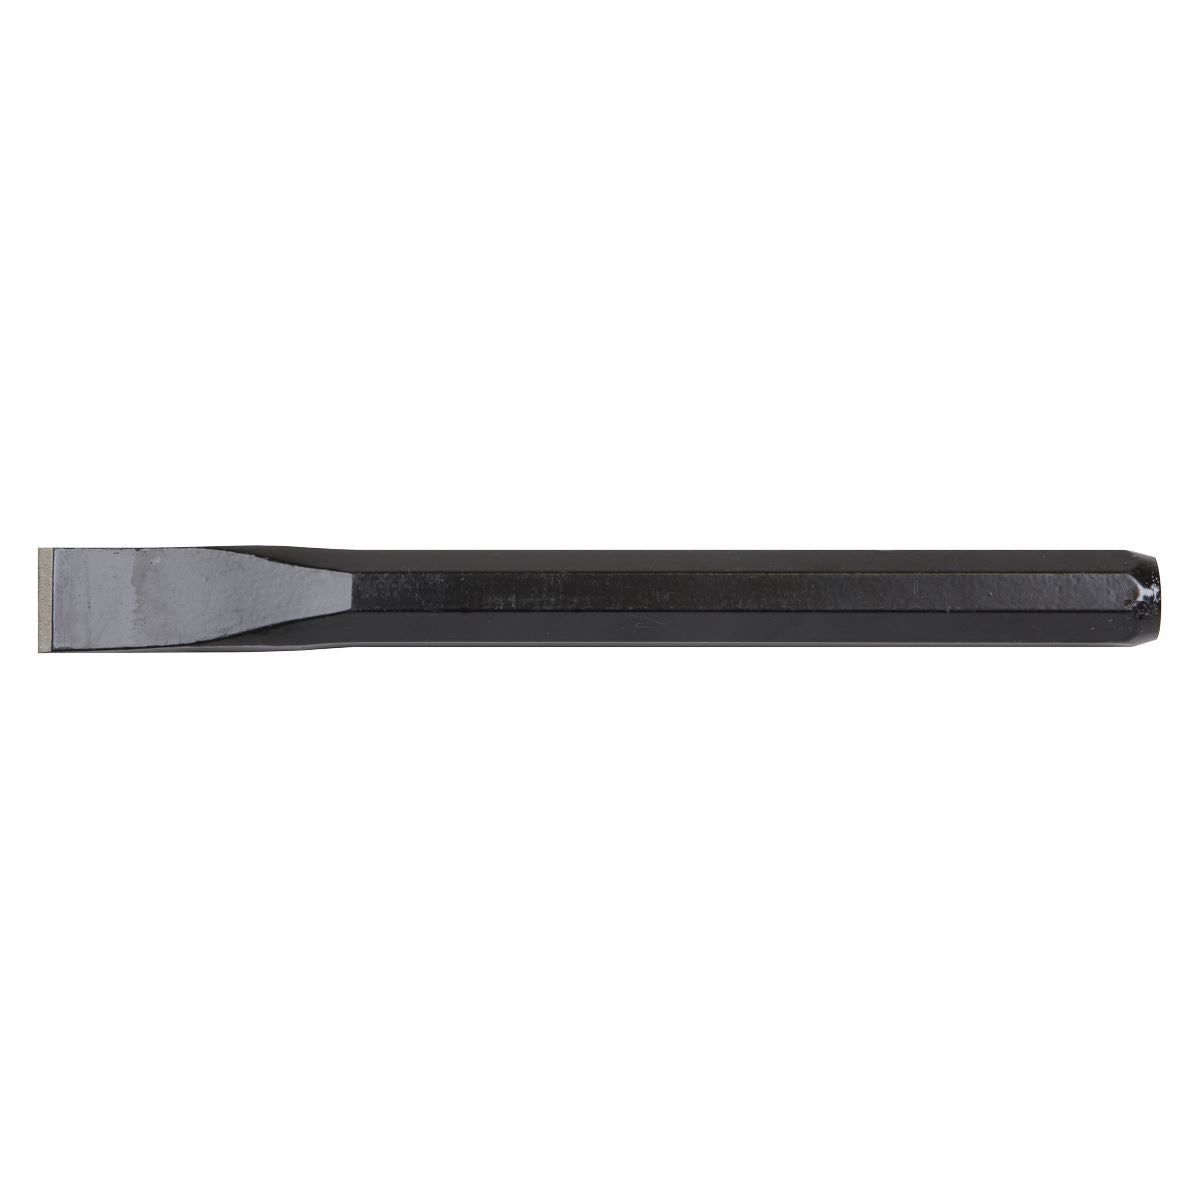 Sealey Cold Chisel 25 x 250mm